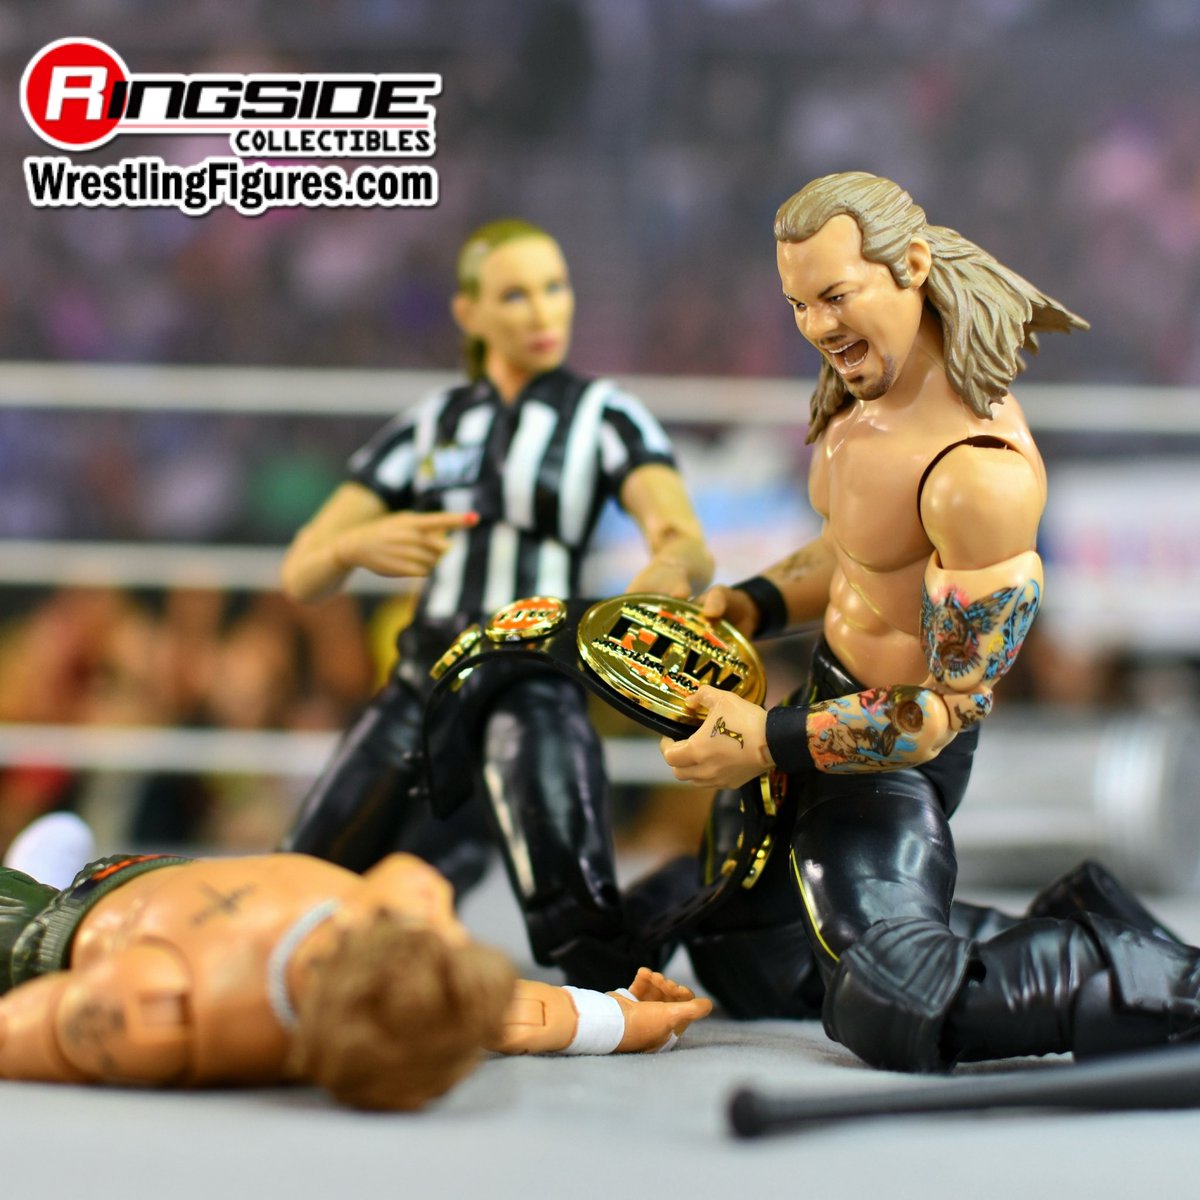 #ANDNEW! 🦁💛 Chris Jericho defeated Hook to become the #FTWChampion! #AEWDynasty

Shop @Jazwares @AEW Figures at Ringsid.ec/AEW

📷 squaredcirclephotography 

#RingsideCollectibles #WrestlingFigures #AEW #Jazwares #AEWRampage #AEWDynamite #AEWCollision #ChrisJericho